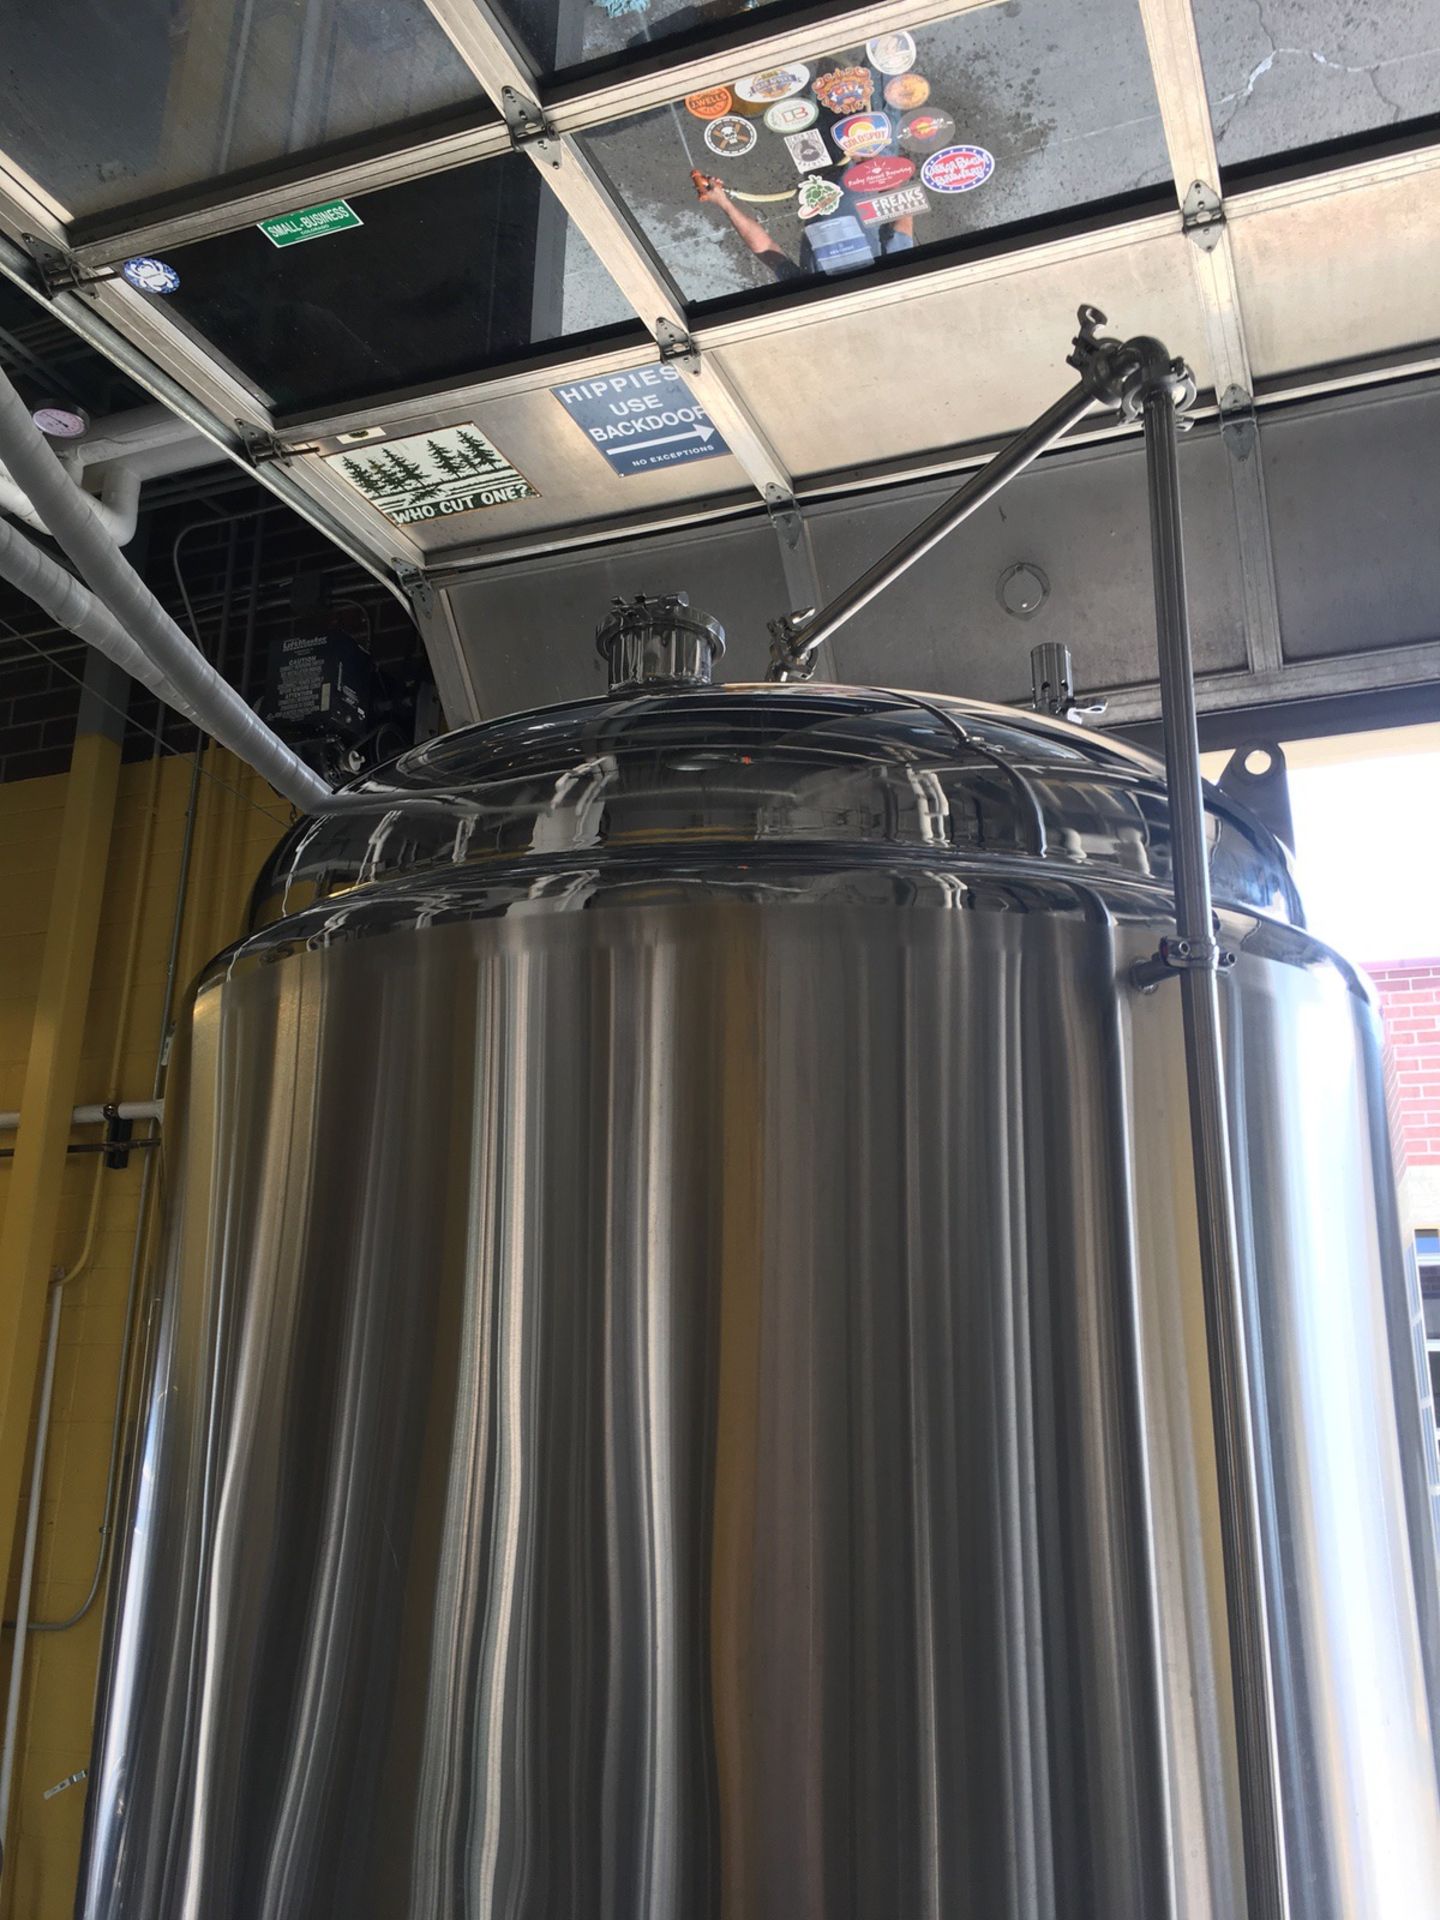 2015 Stout 14 BBL Fermentation Vessel, Stainless Steel, Glycol J | Subject to Bulk | Rig Fee: $350 - Image 6 of 9